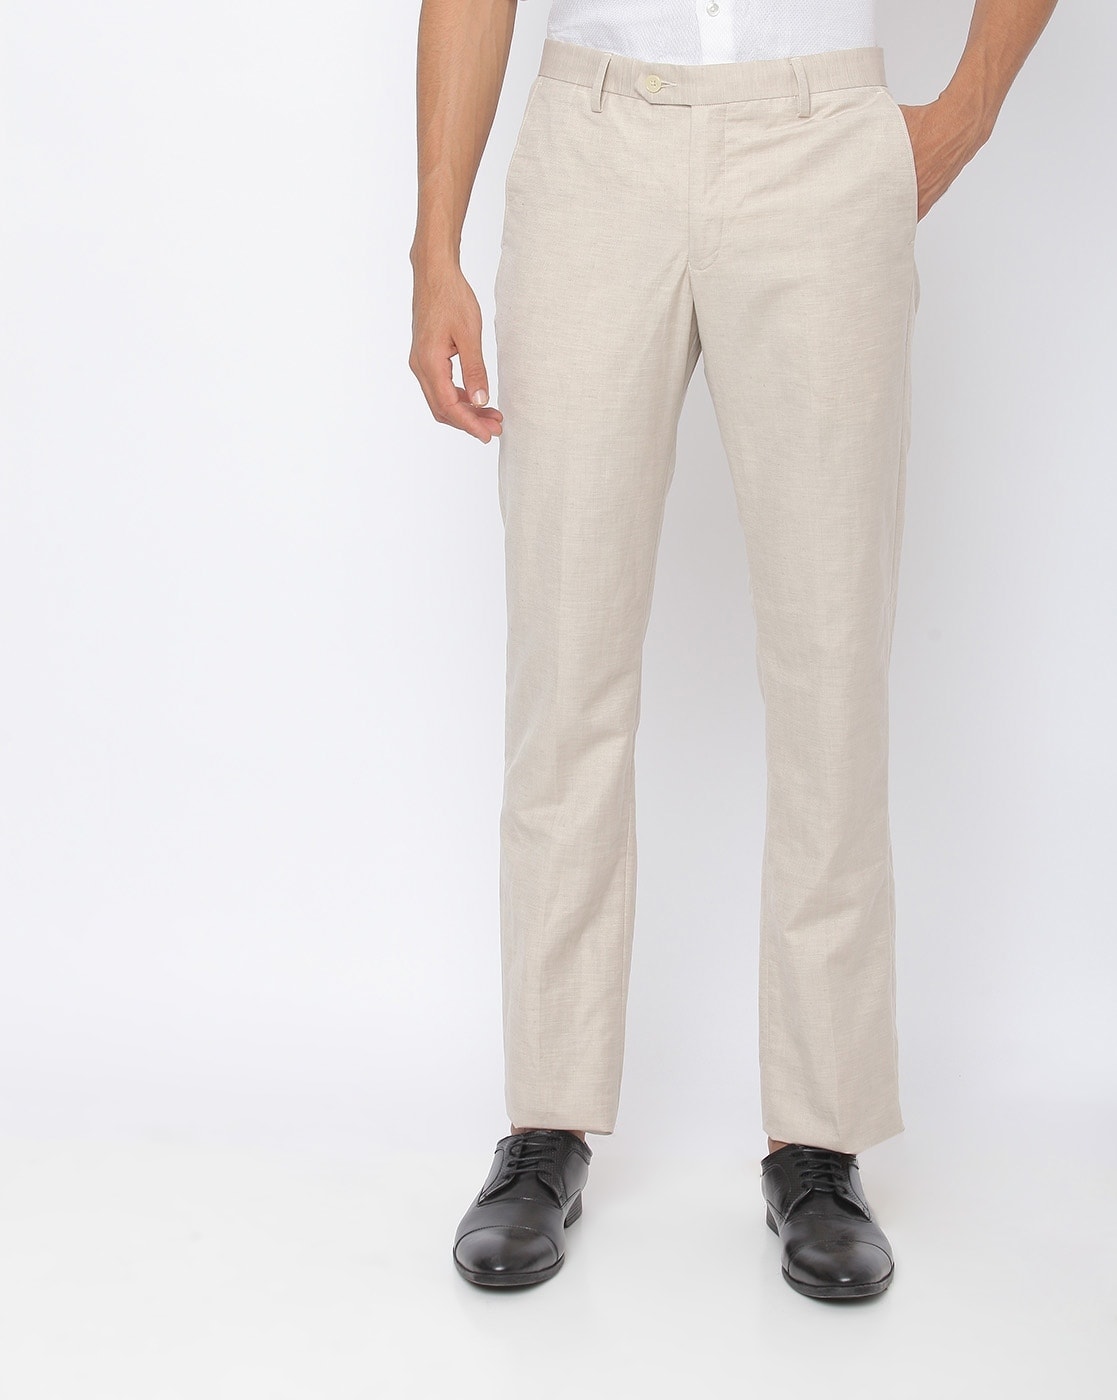 Buy Taupe Trousers  Pants for Men by ONLY VIMALAPPAREL Online  Ajiocom